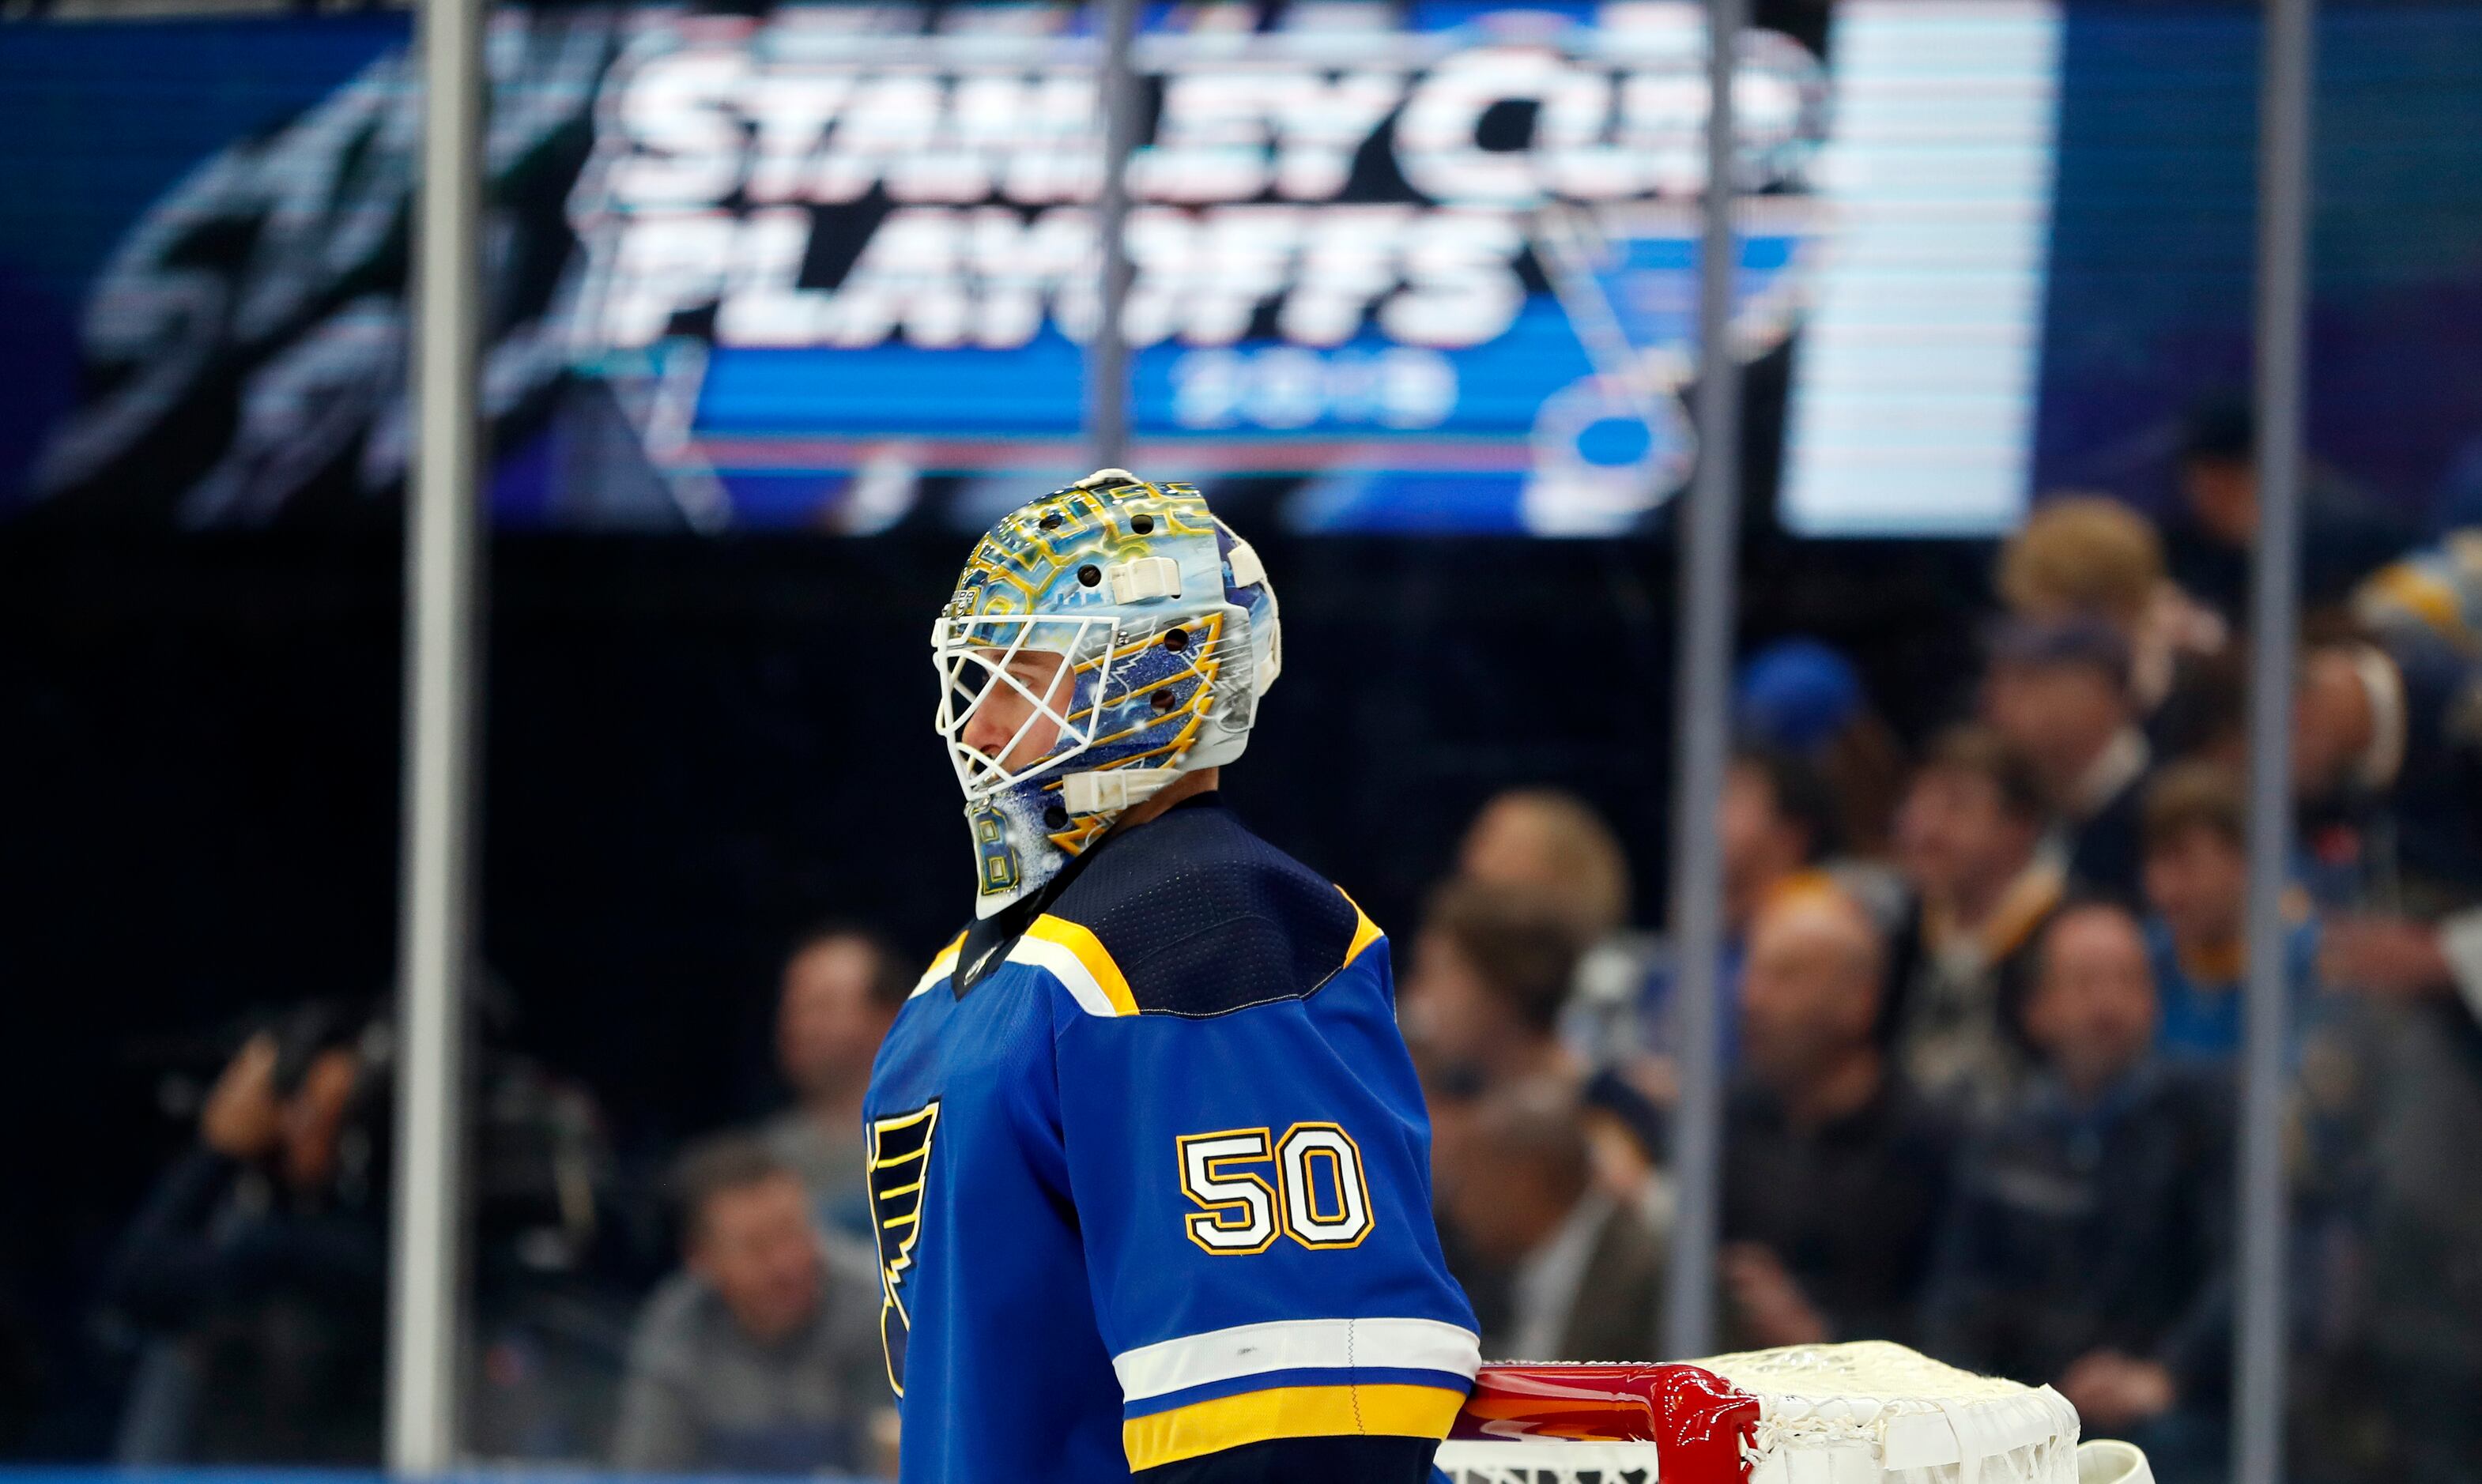 Jordan Binnington came out of nowhere to save the St. Louis Blues